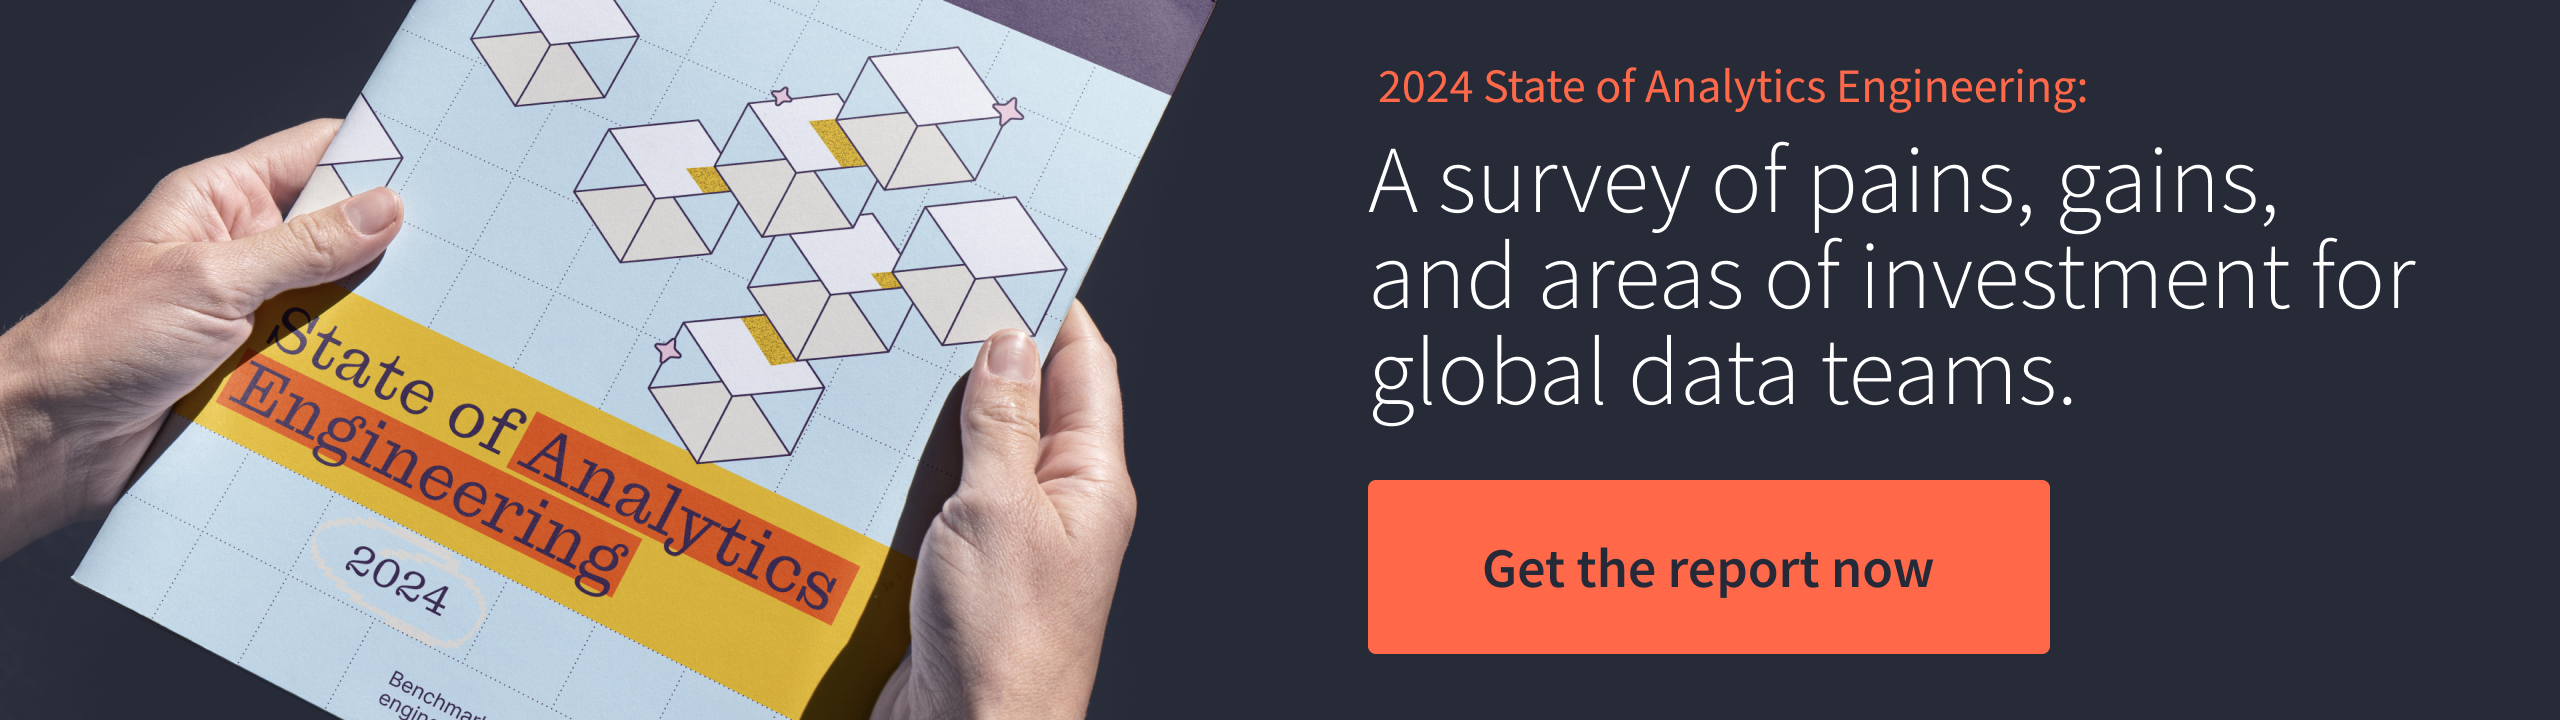 Download the 2024 State of Analytics Engineering Report